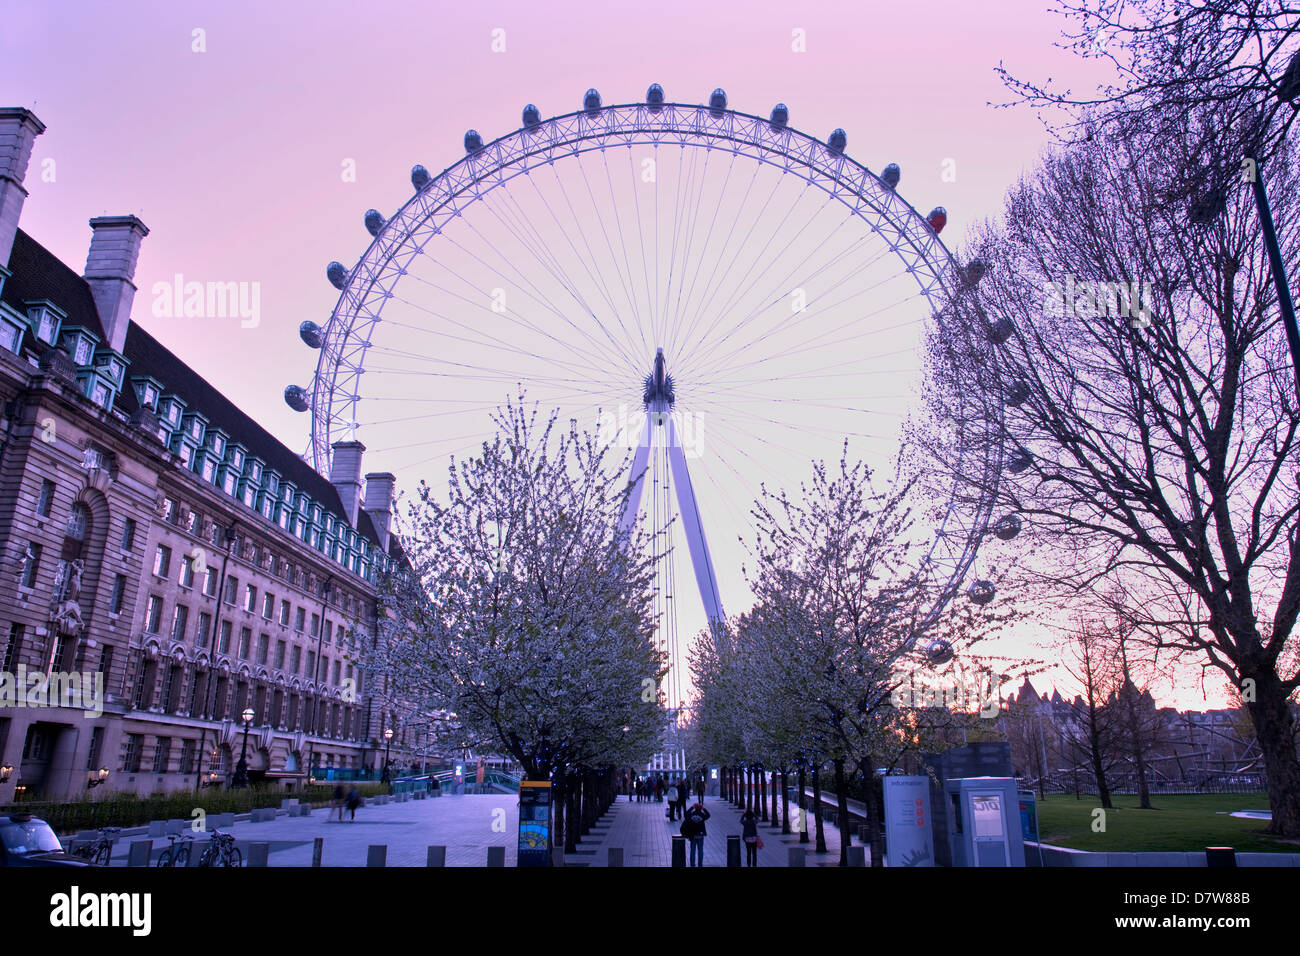 L'EDF Energy London Eye, Londres, Angleterre Banque D'Images